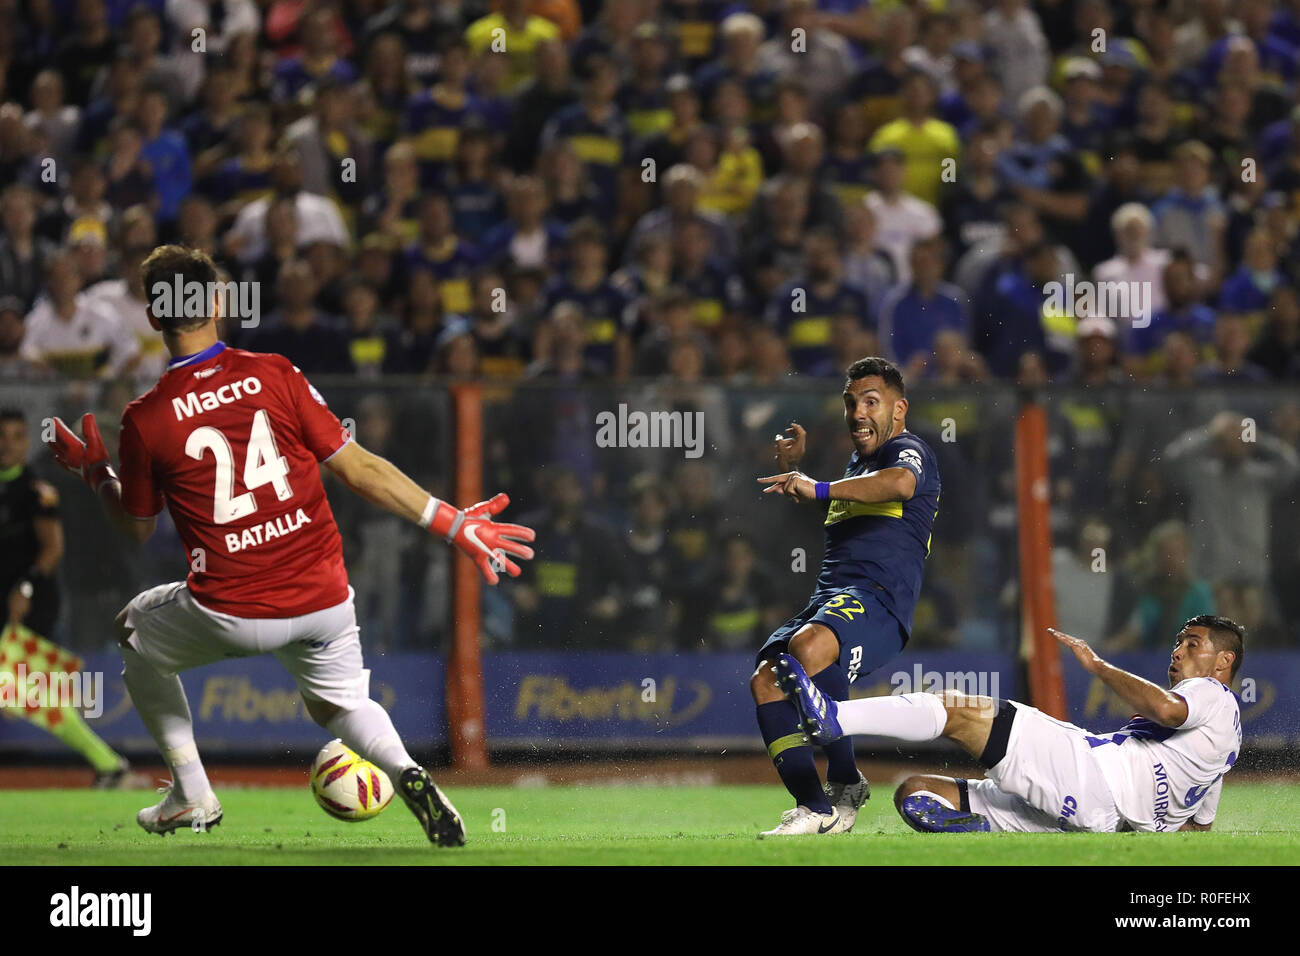 Buenos Aires, Argentina - November 03, 2018: Carlos Tevez scoring his second goal of the night in the Alberto J. Armando in Buenos Aires, Argentina Stock Photo